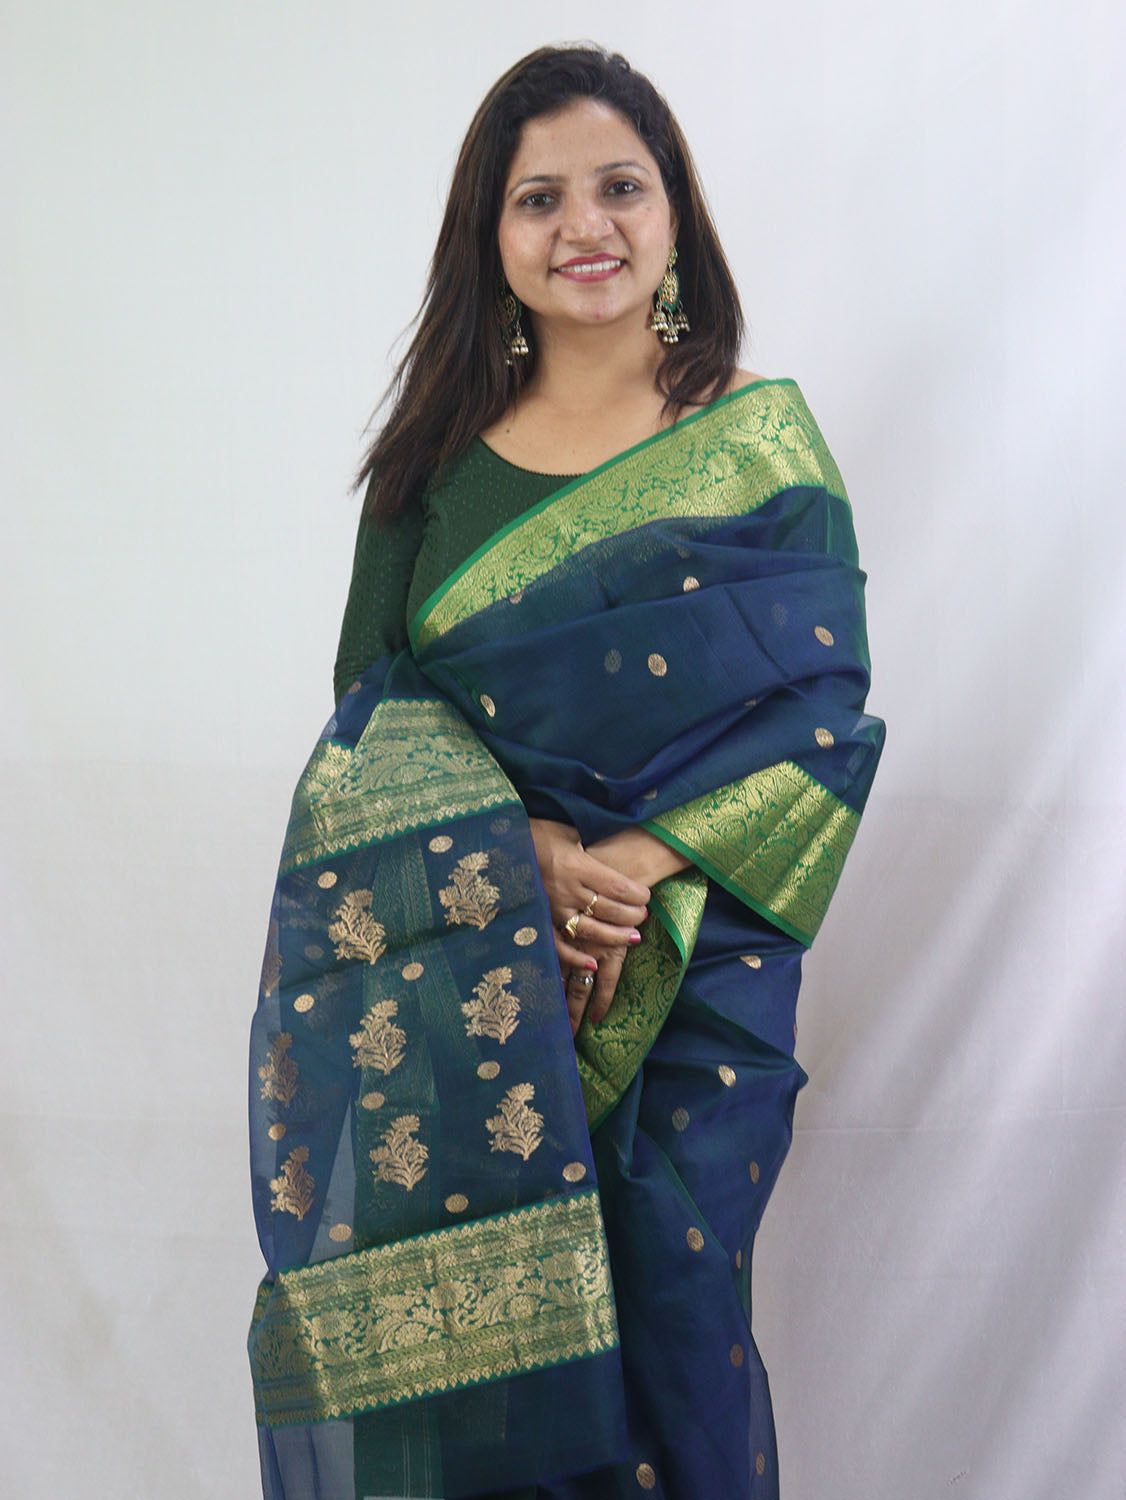 Exquisite Blue Handloom Chanderi Pure Katan Silk Saree - Perfect for Any Occasion